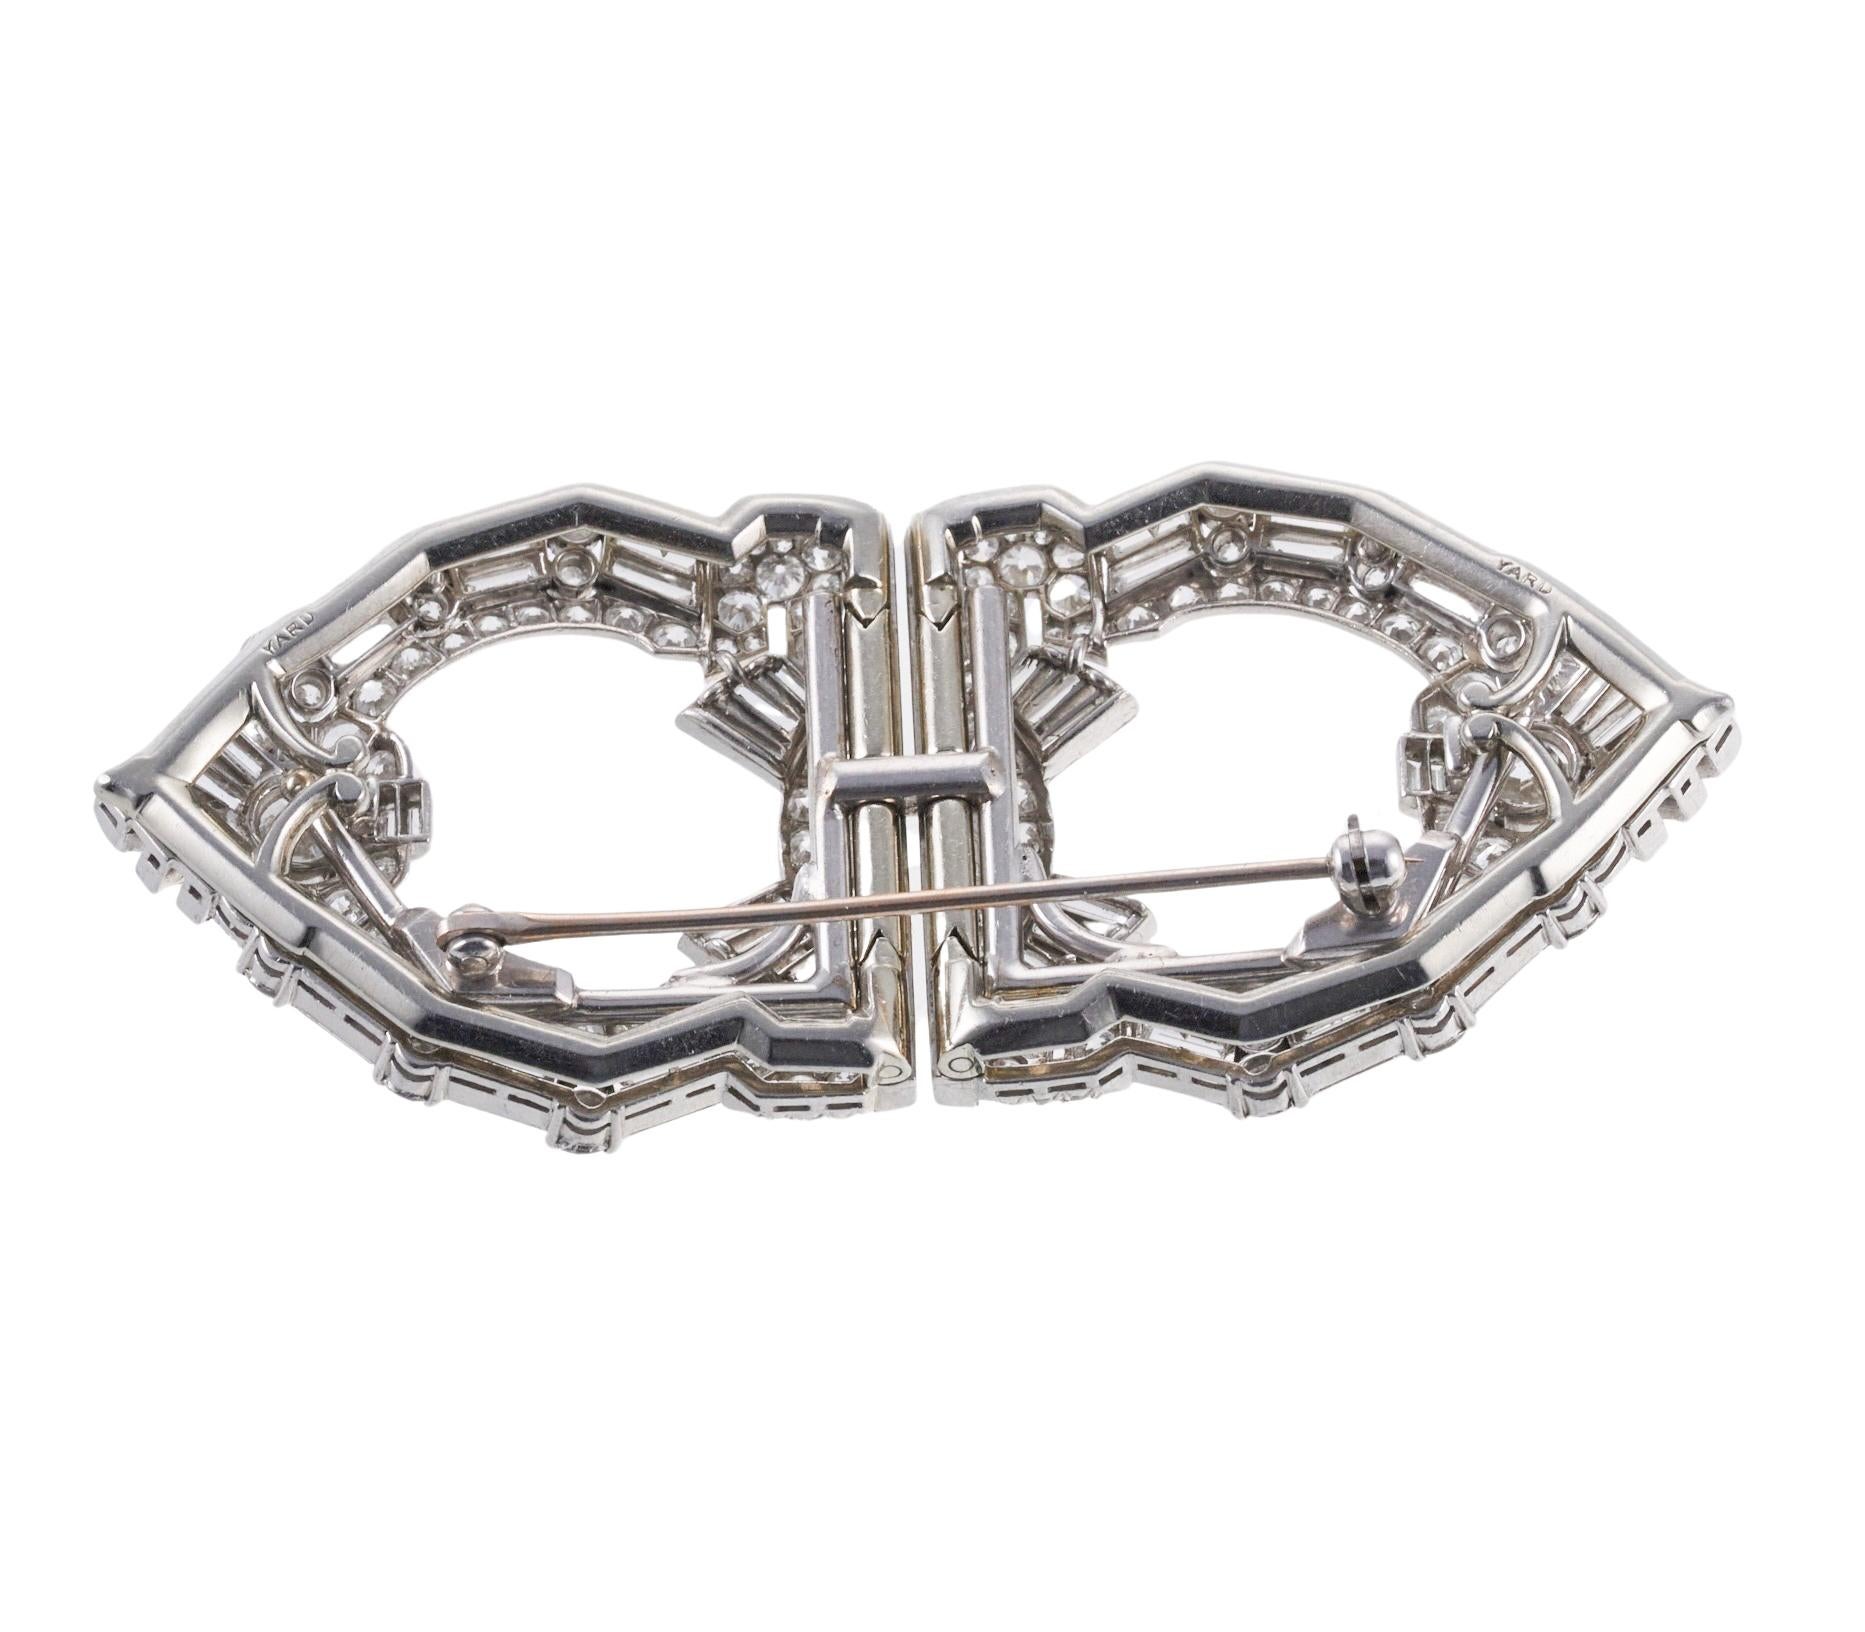 Art Deco platinum brooch by Raymond Yard, convertible into two clips. Adorned with approximately 12 carats in GH/VS-Si diamonds. Brooch measures 2.75